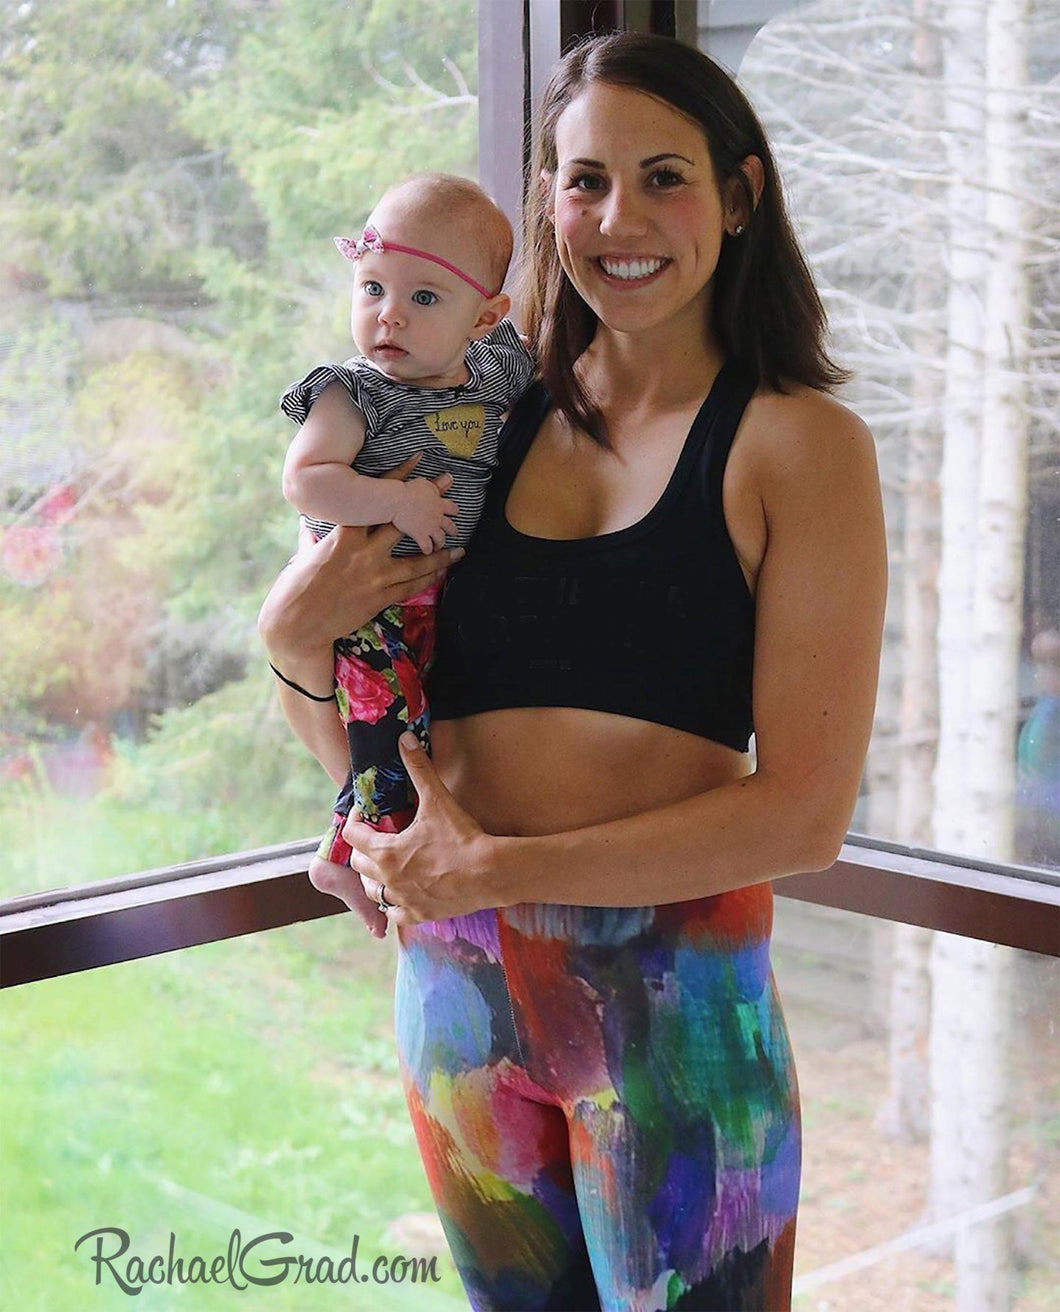 Colorful Art Leggings by Artist Rachael Grad on Mom and Baby